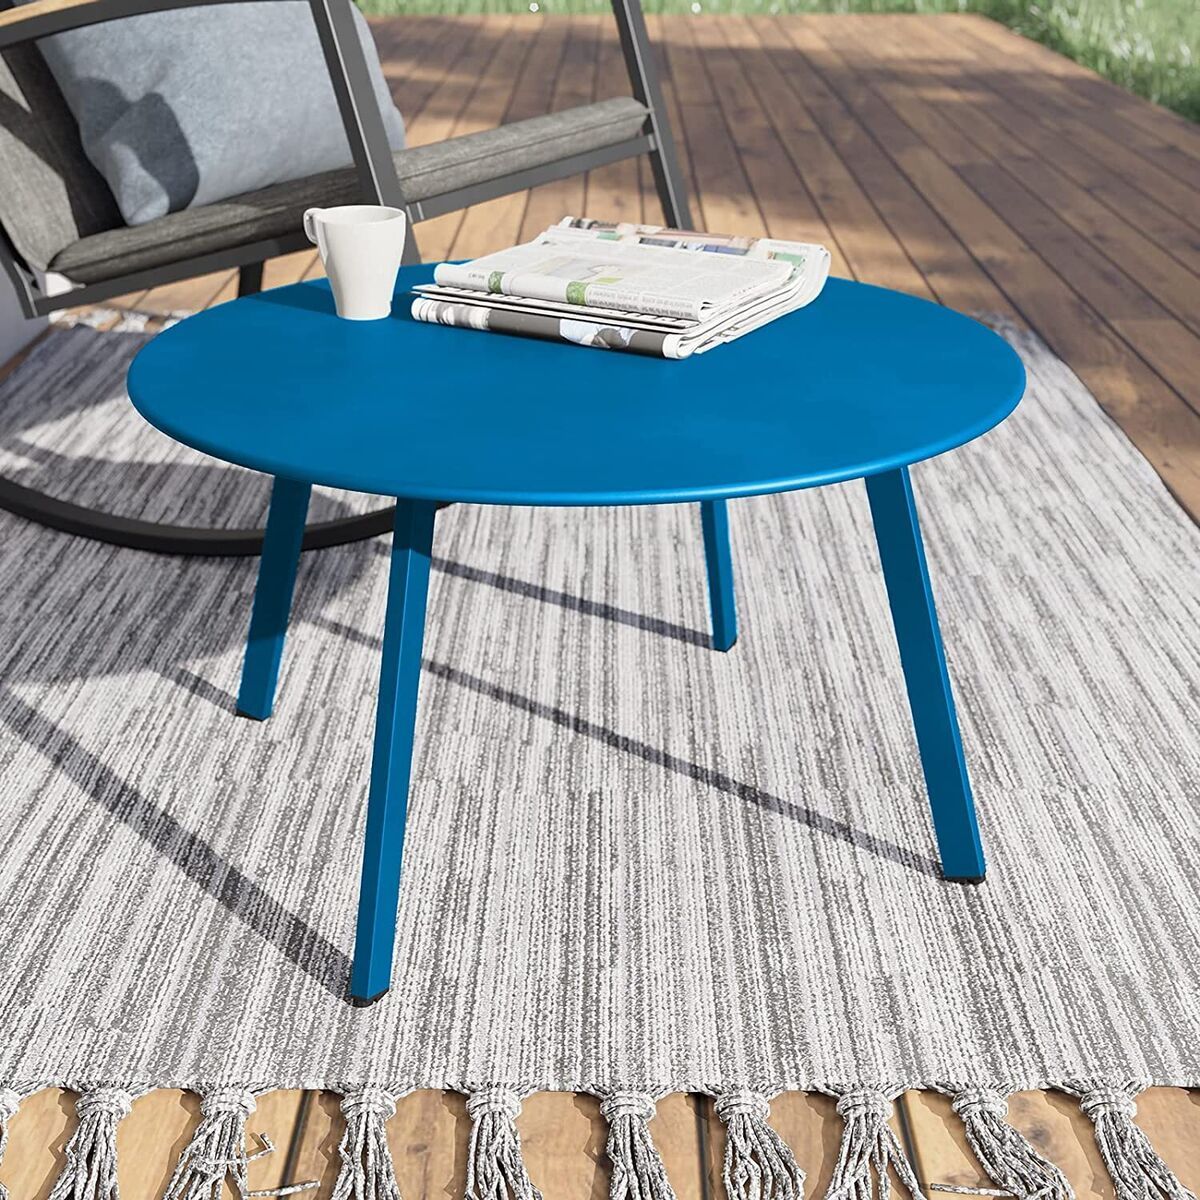 Outdoor Steel Patio Side Table, Round Coffee Table Weather Resistant ,Blue  | Ebay Throughout Round Steel Patio Coffee Tables (View 14 of 15)